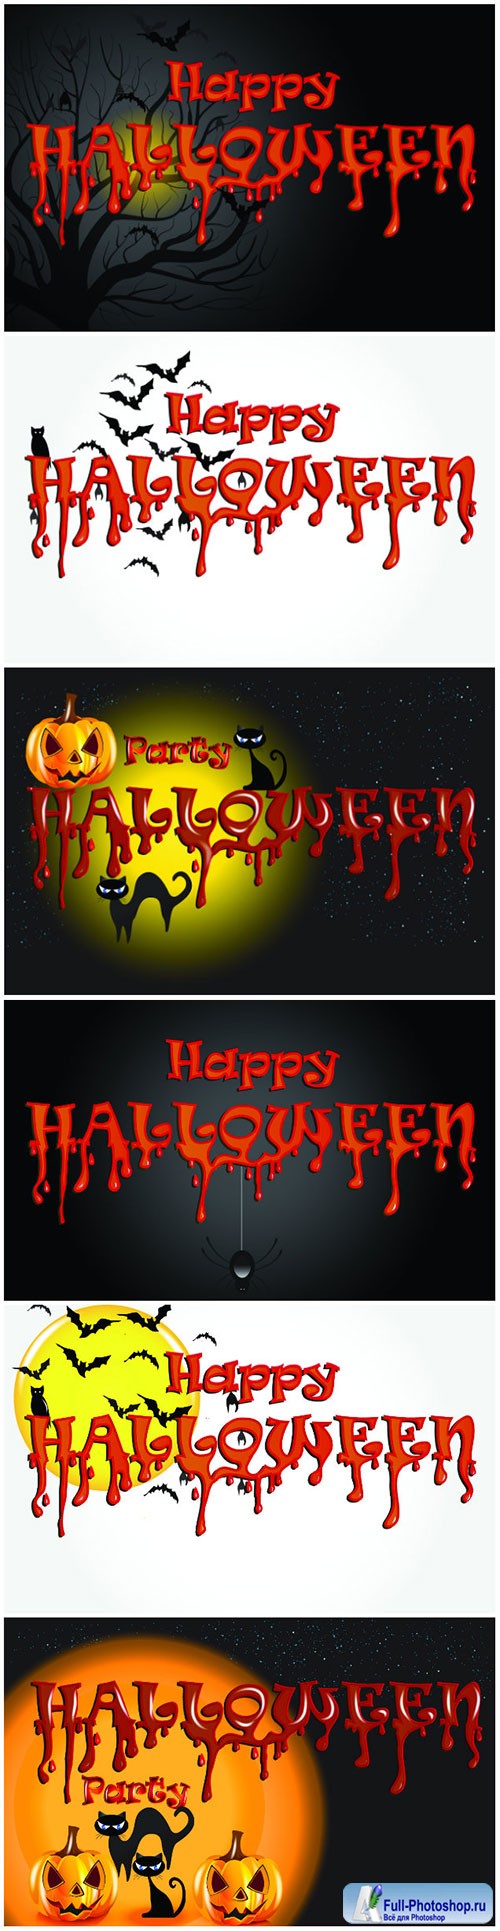 Halloween horror party background